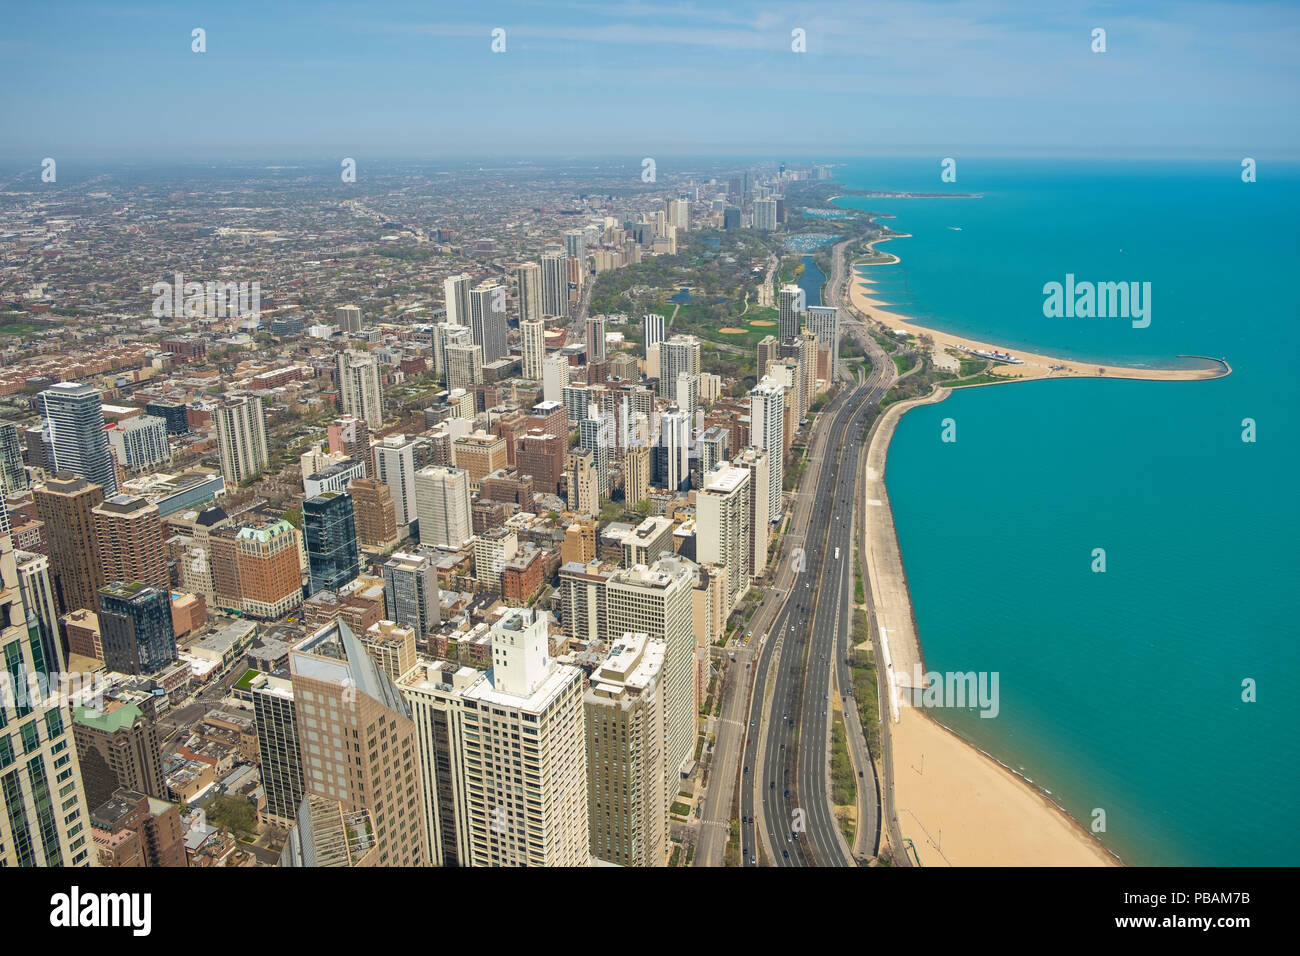 View from 875 N Michigan Avenue, Chicago city skyline Stock Photo